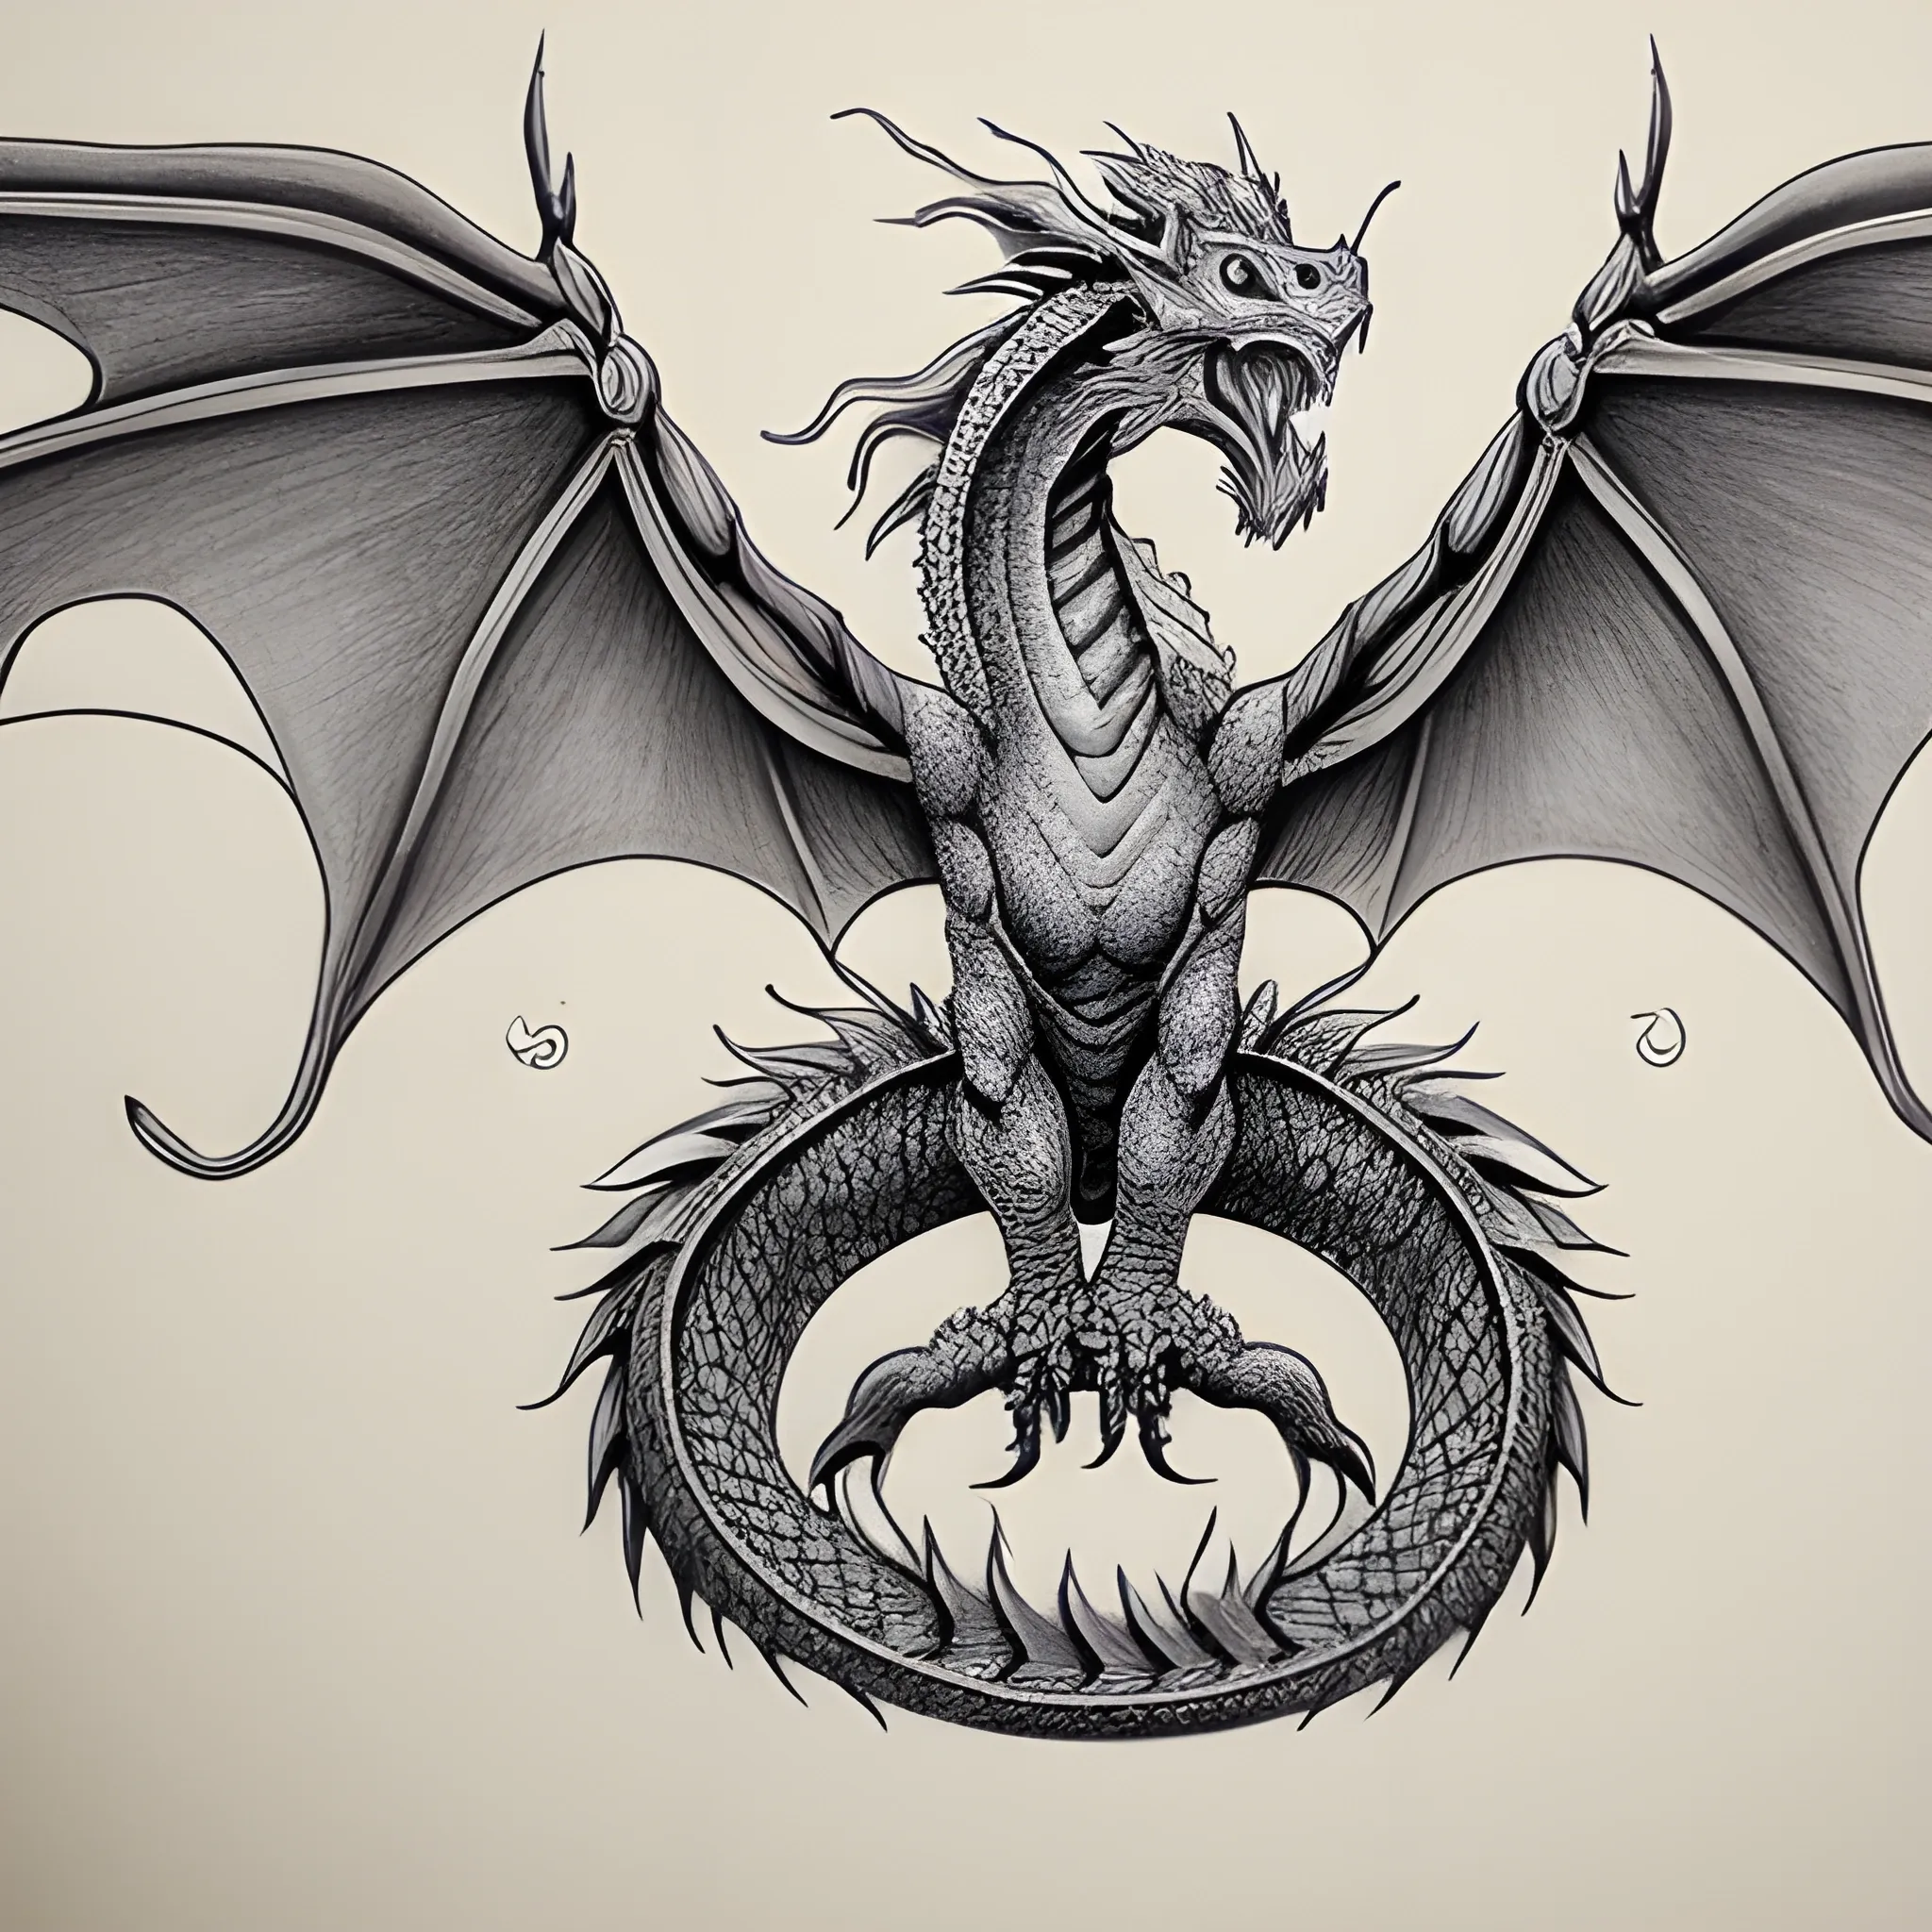 design a Japanese dragon drawing with wings spread, and neck ben ...